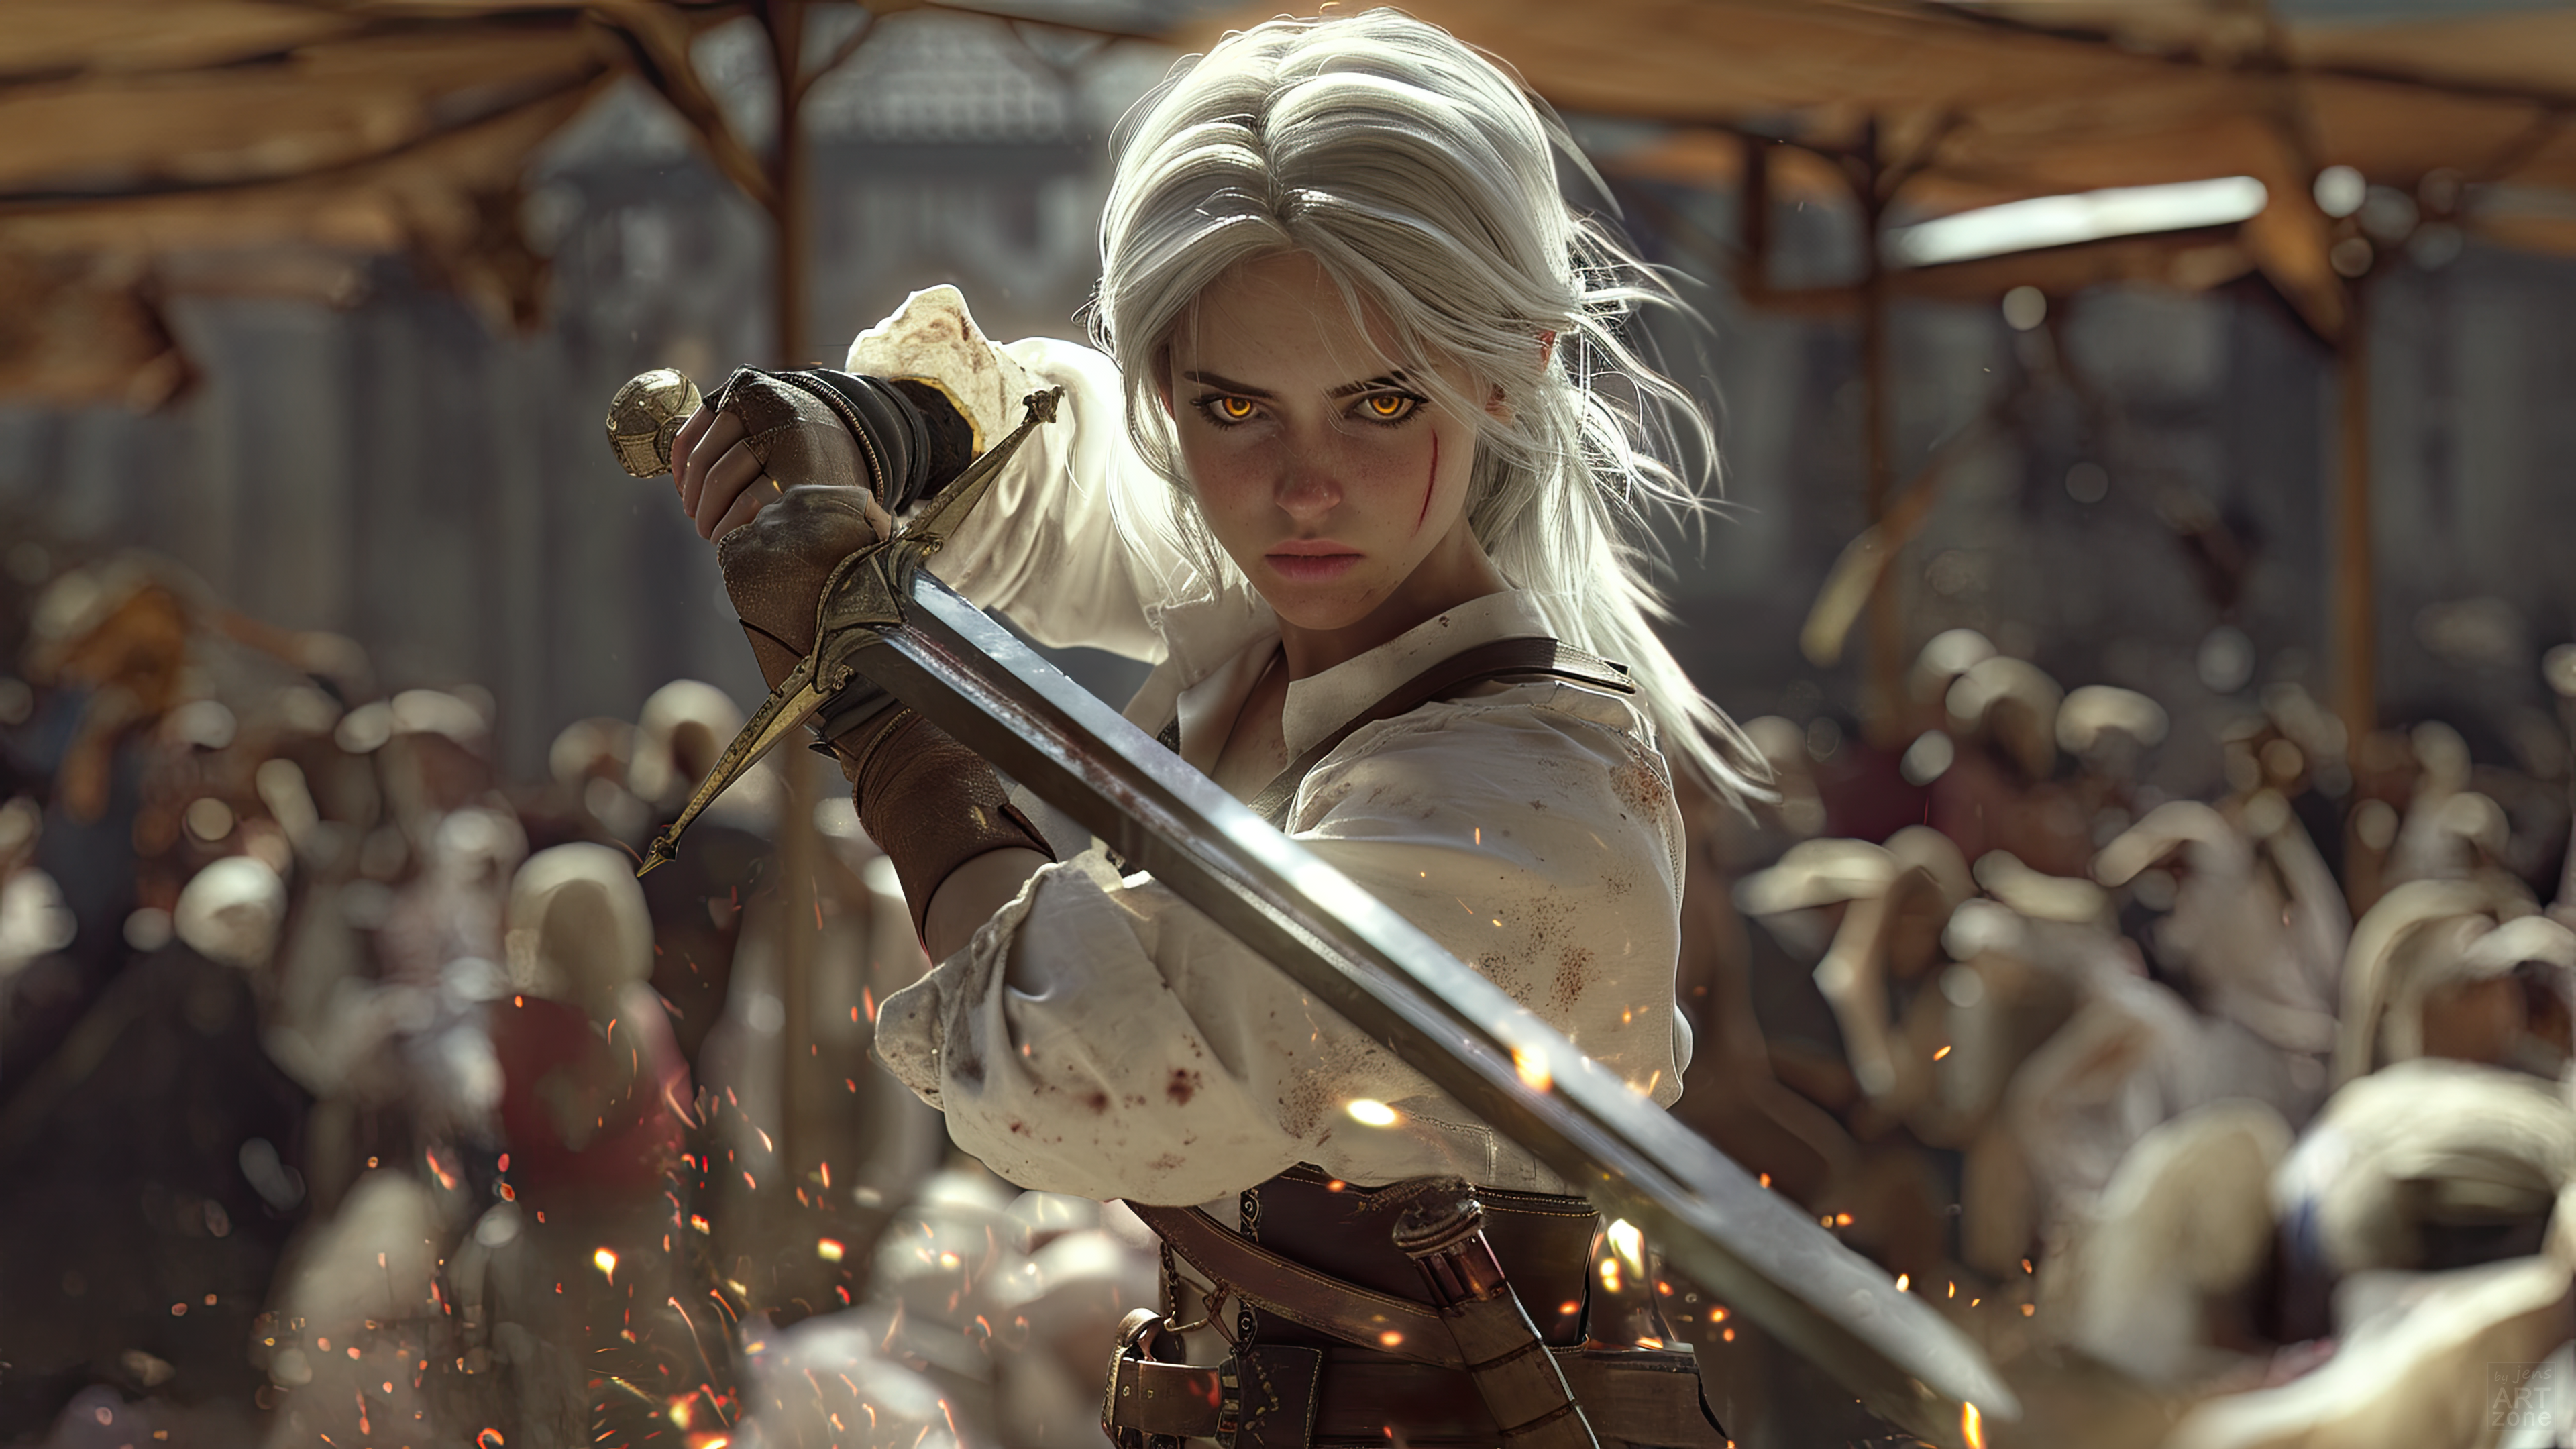 General 3840x2160 The Witcher illustration white hair digital art The Witcher 3: Wild Hunt Cirilla Fiona Elen Riannon AI art women with swords video game art sword looking at viewer long hair blurred blurry background closed mouth wounds yellow eyes ringed eyes